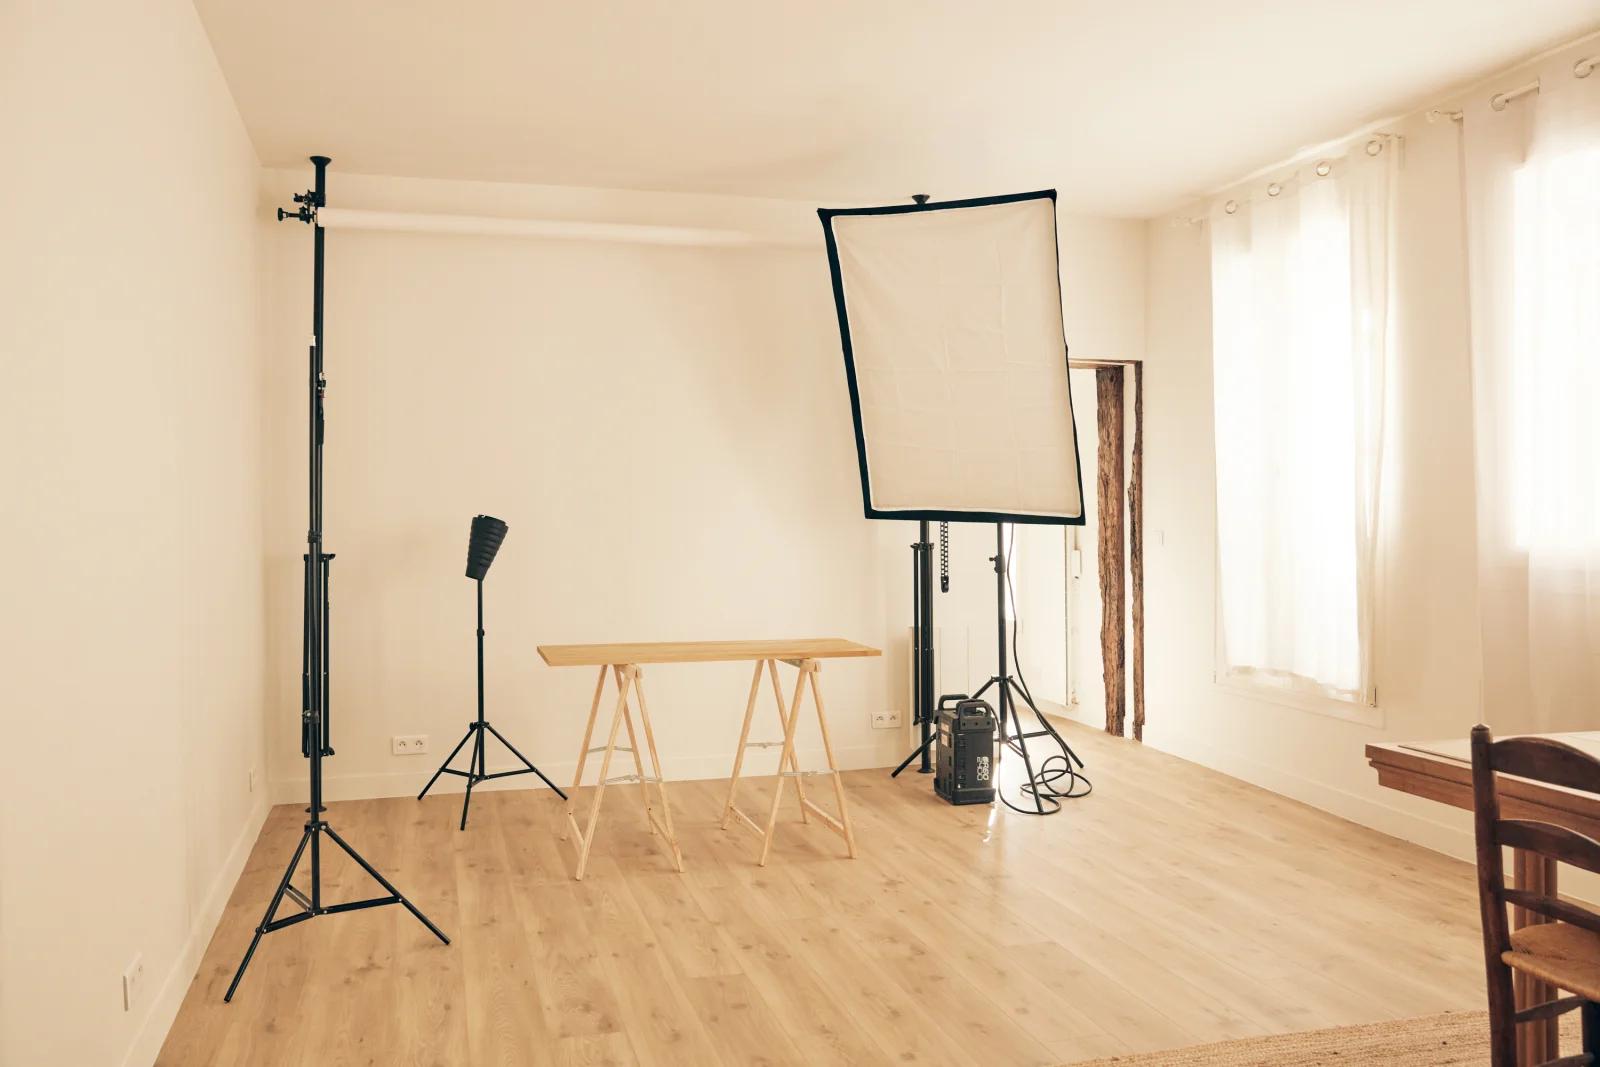 A photographer's studio with an uncluttered style